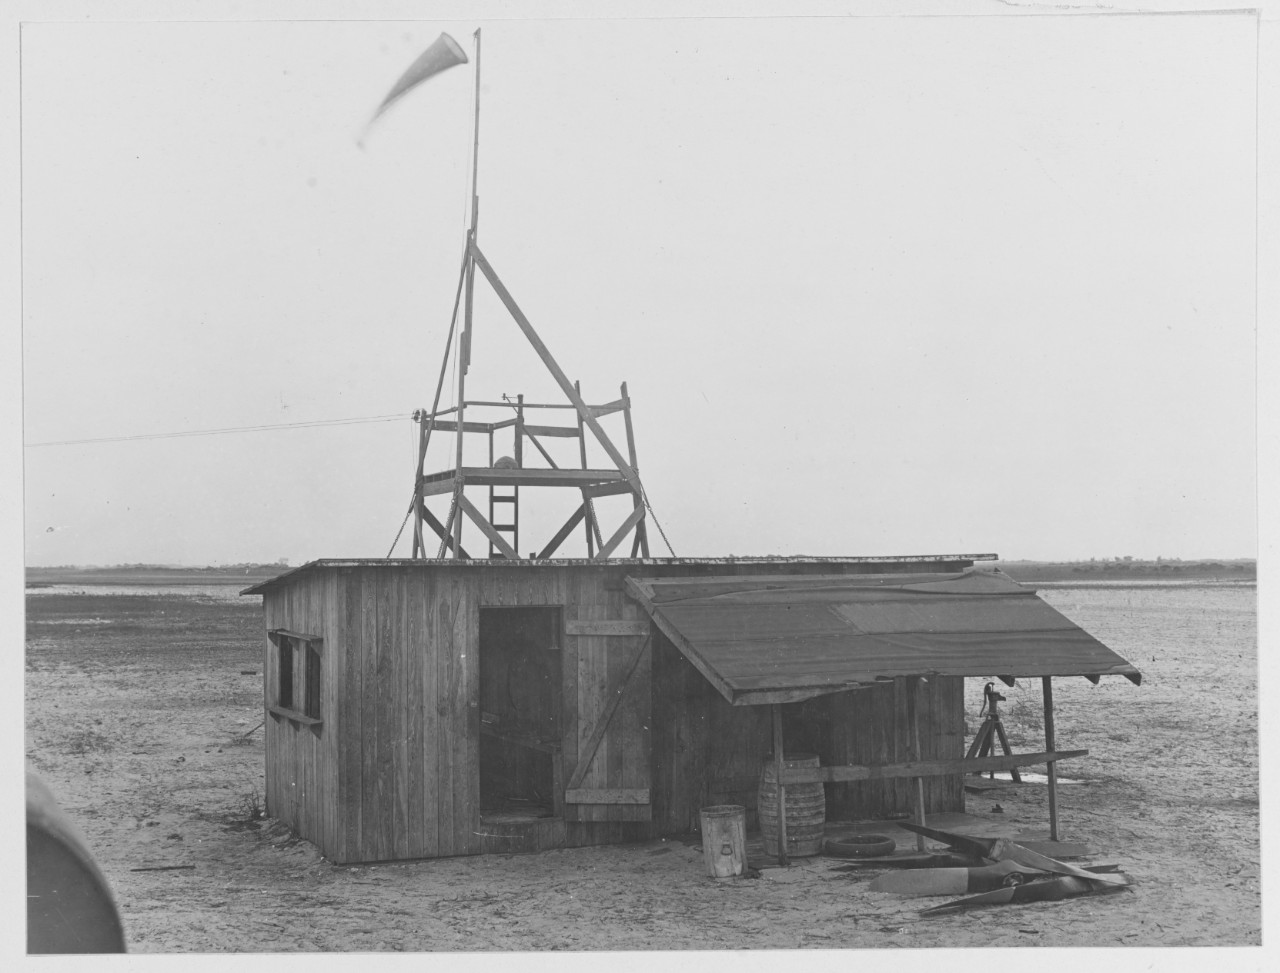 Tool House - oil storage- observation tower at field.